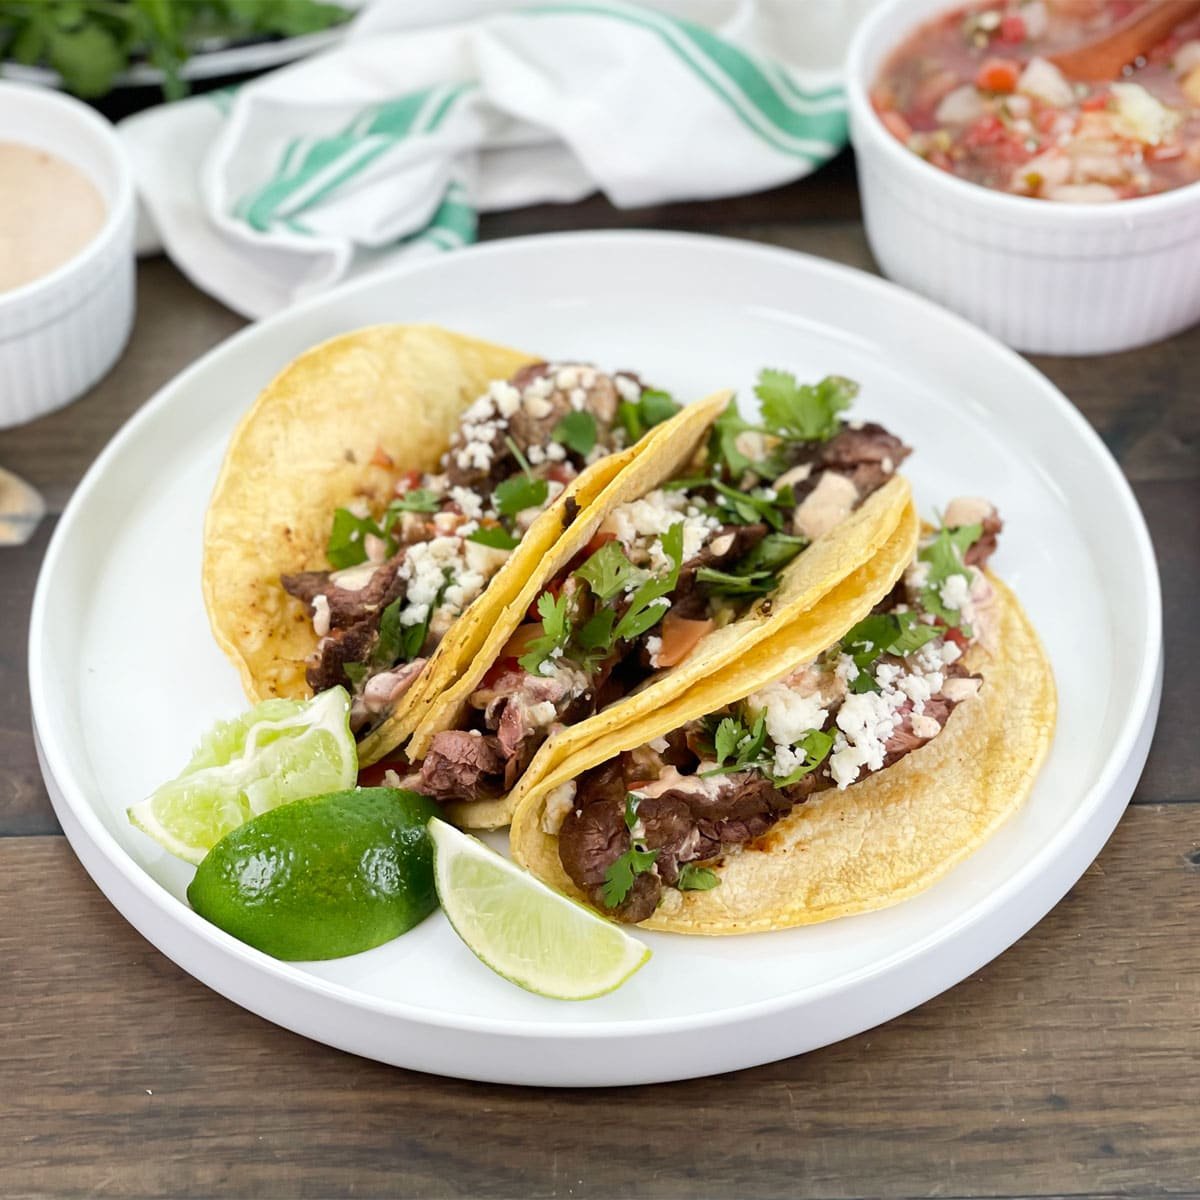 Carne asada tacos in soft corn tortillas, on a white plate with lime wedges.